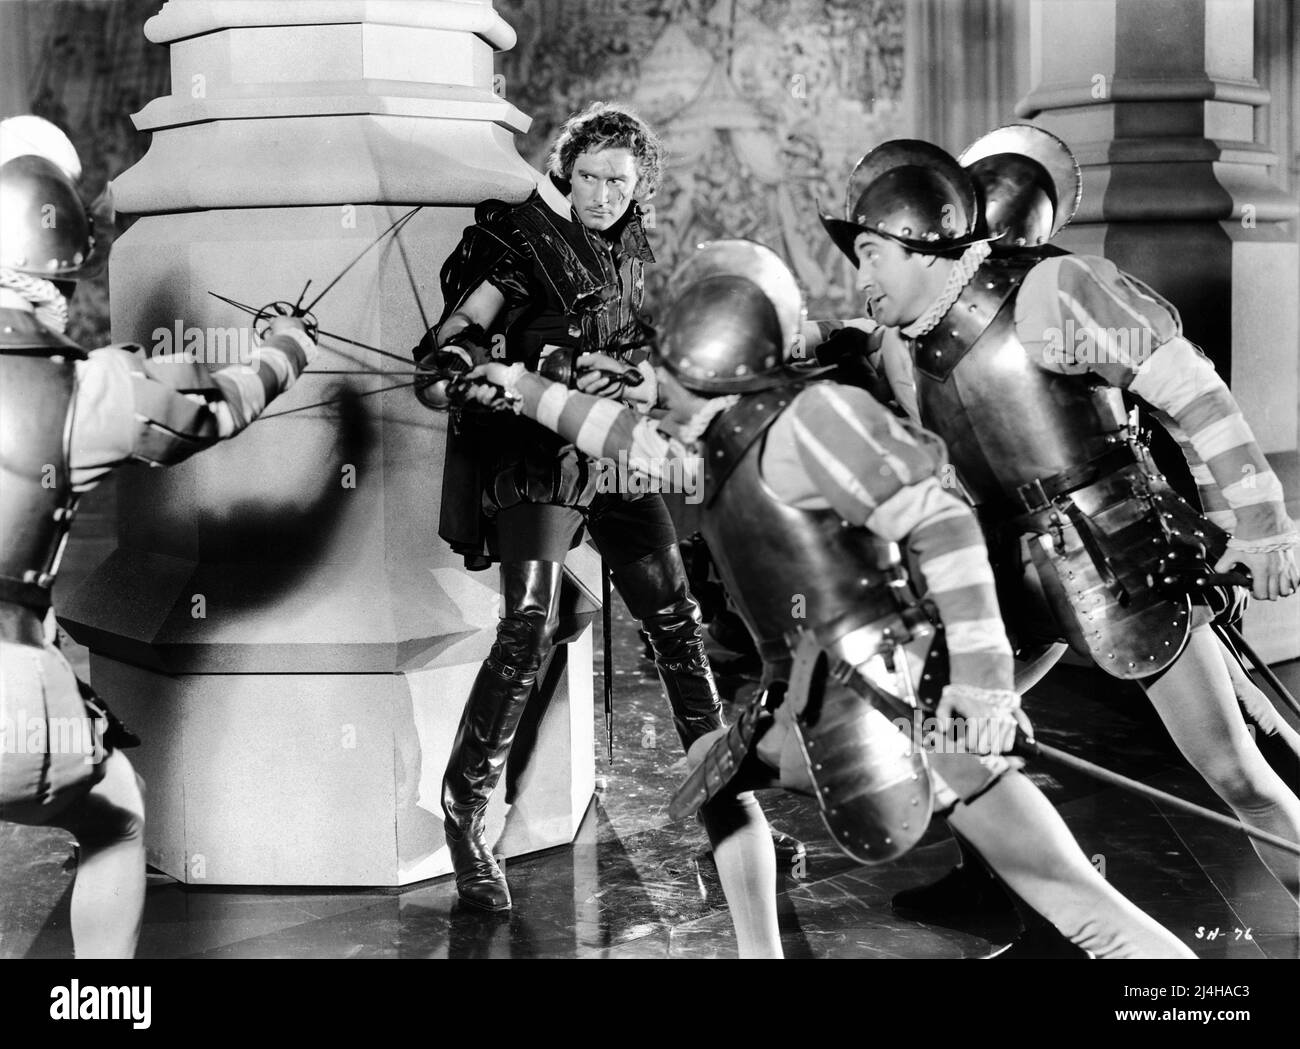 ERROL FLYNN fighting Palace Guards in THE SEA HAWK 1940 director MICHAEL CURTIZ writers Howard Koch and Seton I. Miller costumes Orry-Kelly music Erich Wolfgang Korngold Warner Bros. Stock Photo